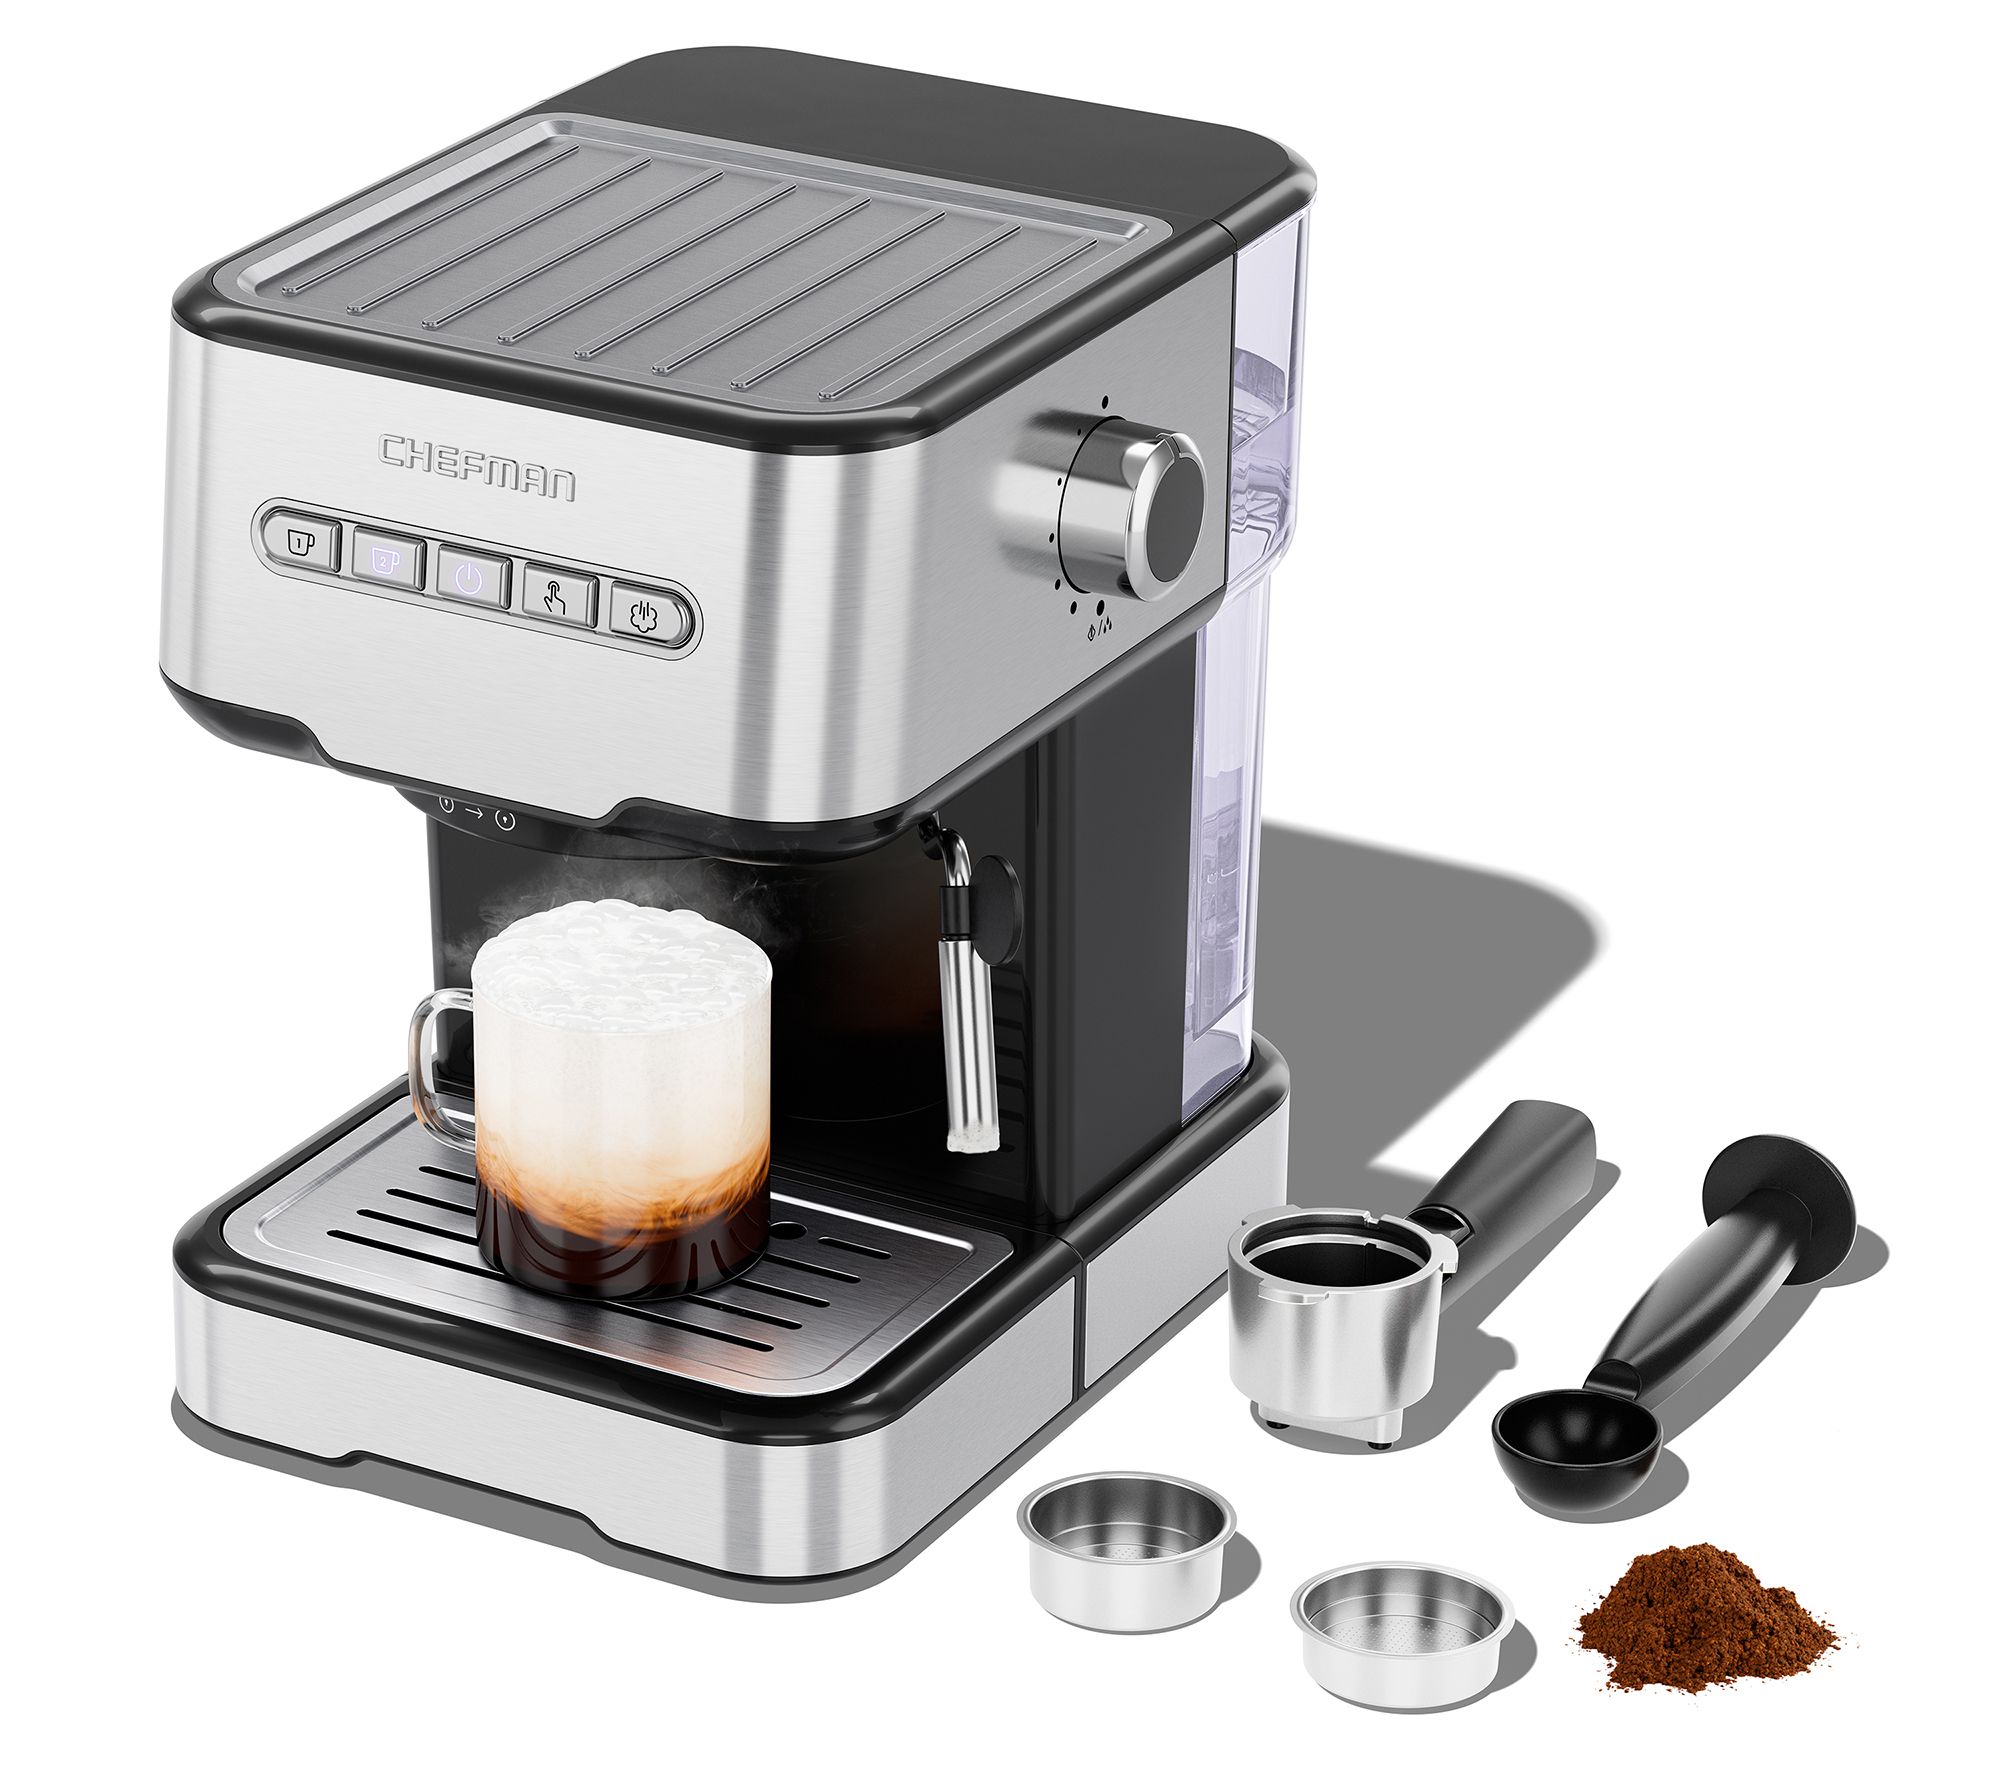  Chefman Froth + Brew Coffee Maker and Milk Frother